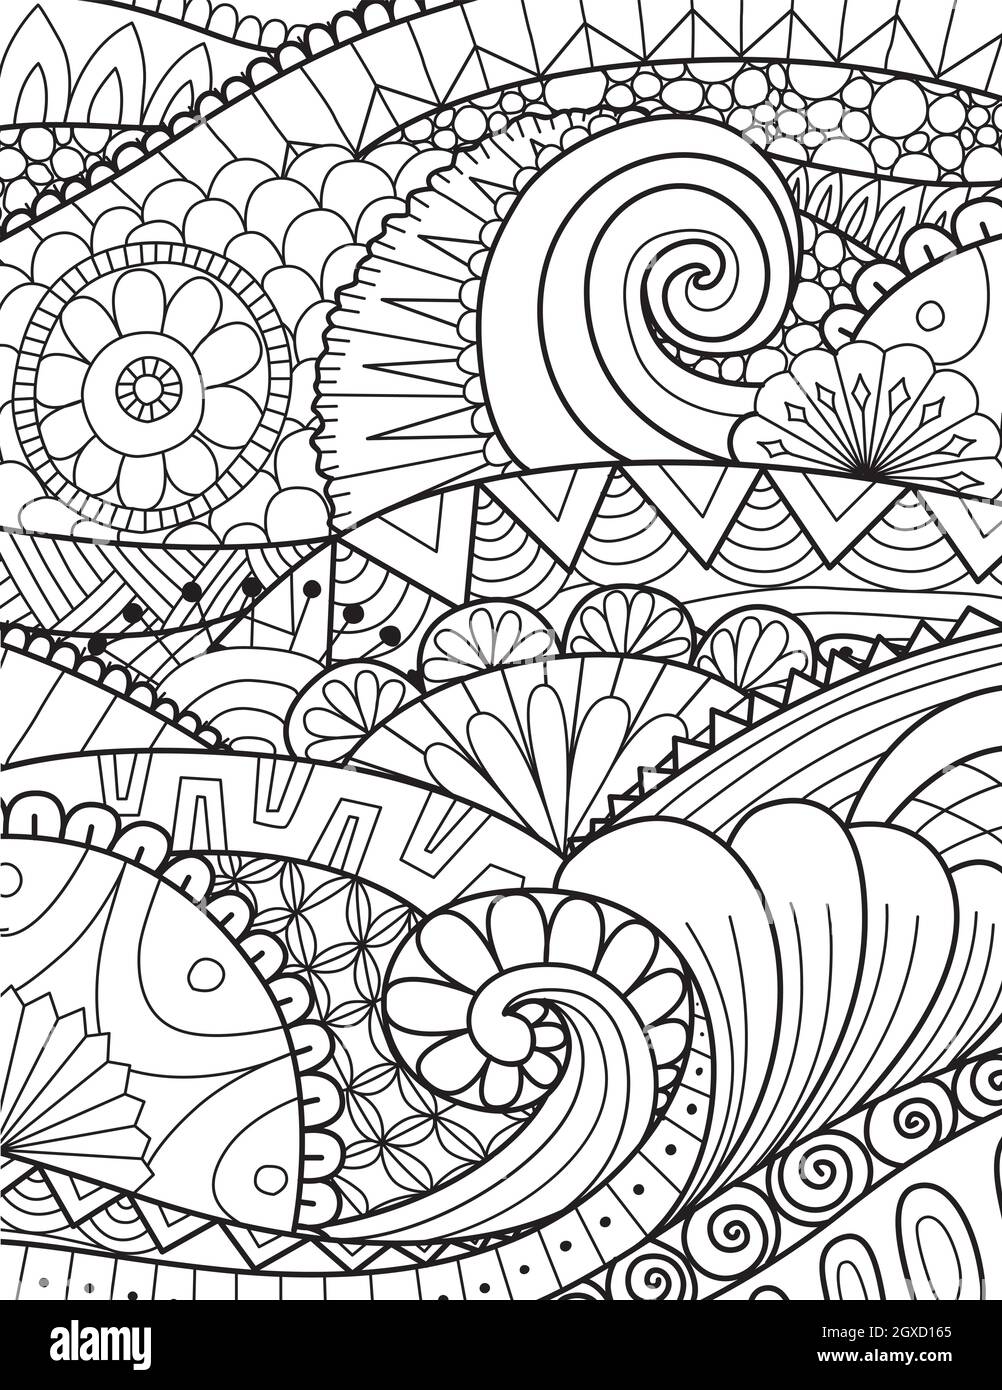 Coloring book page with abstract art spiral Vector Image